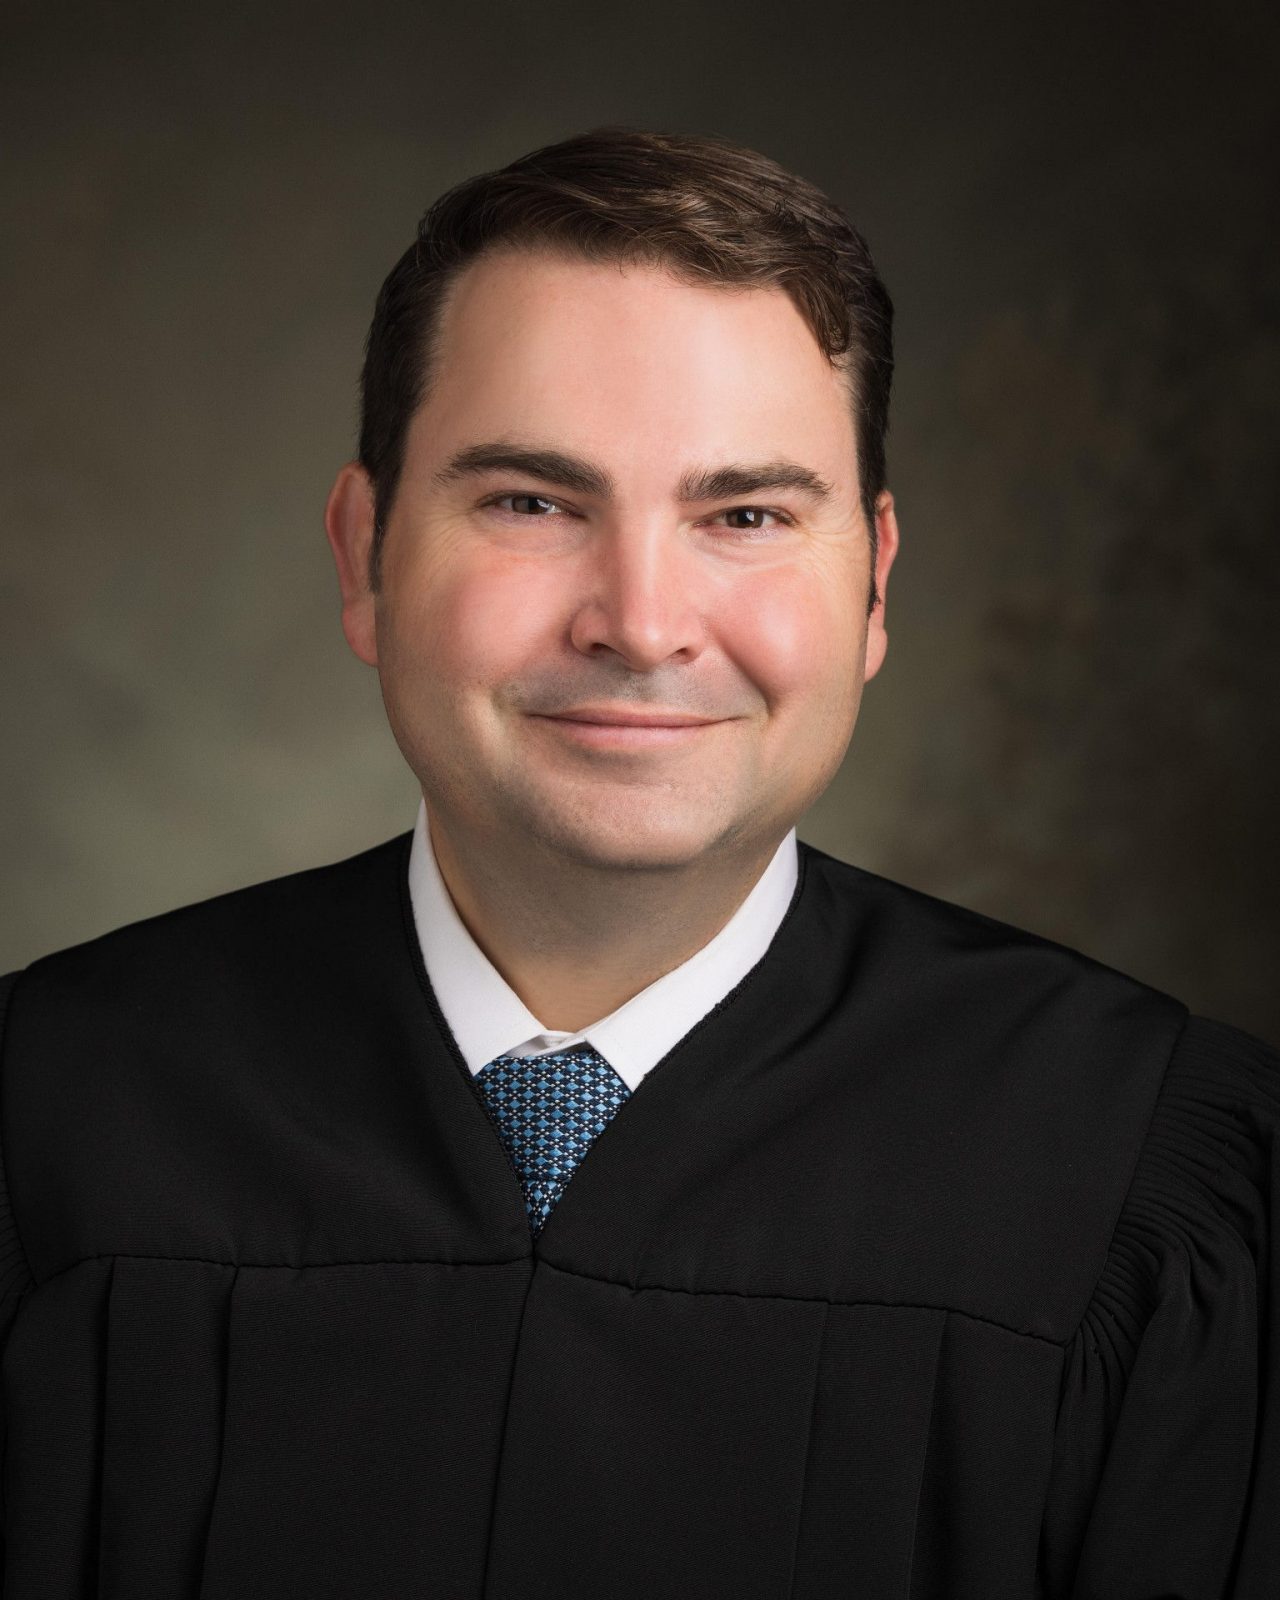 JUDGE CHARLES A. STORMONT